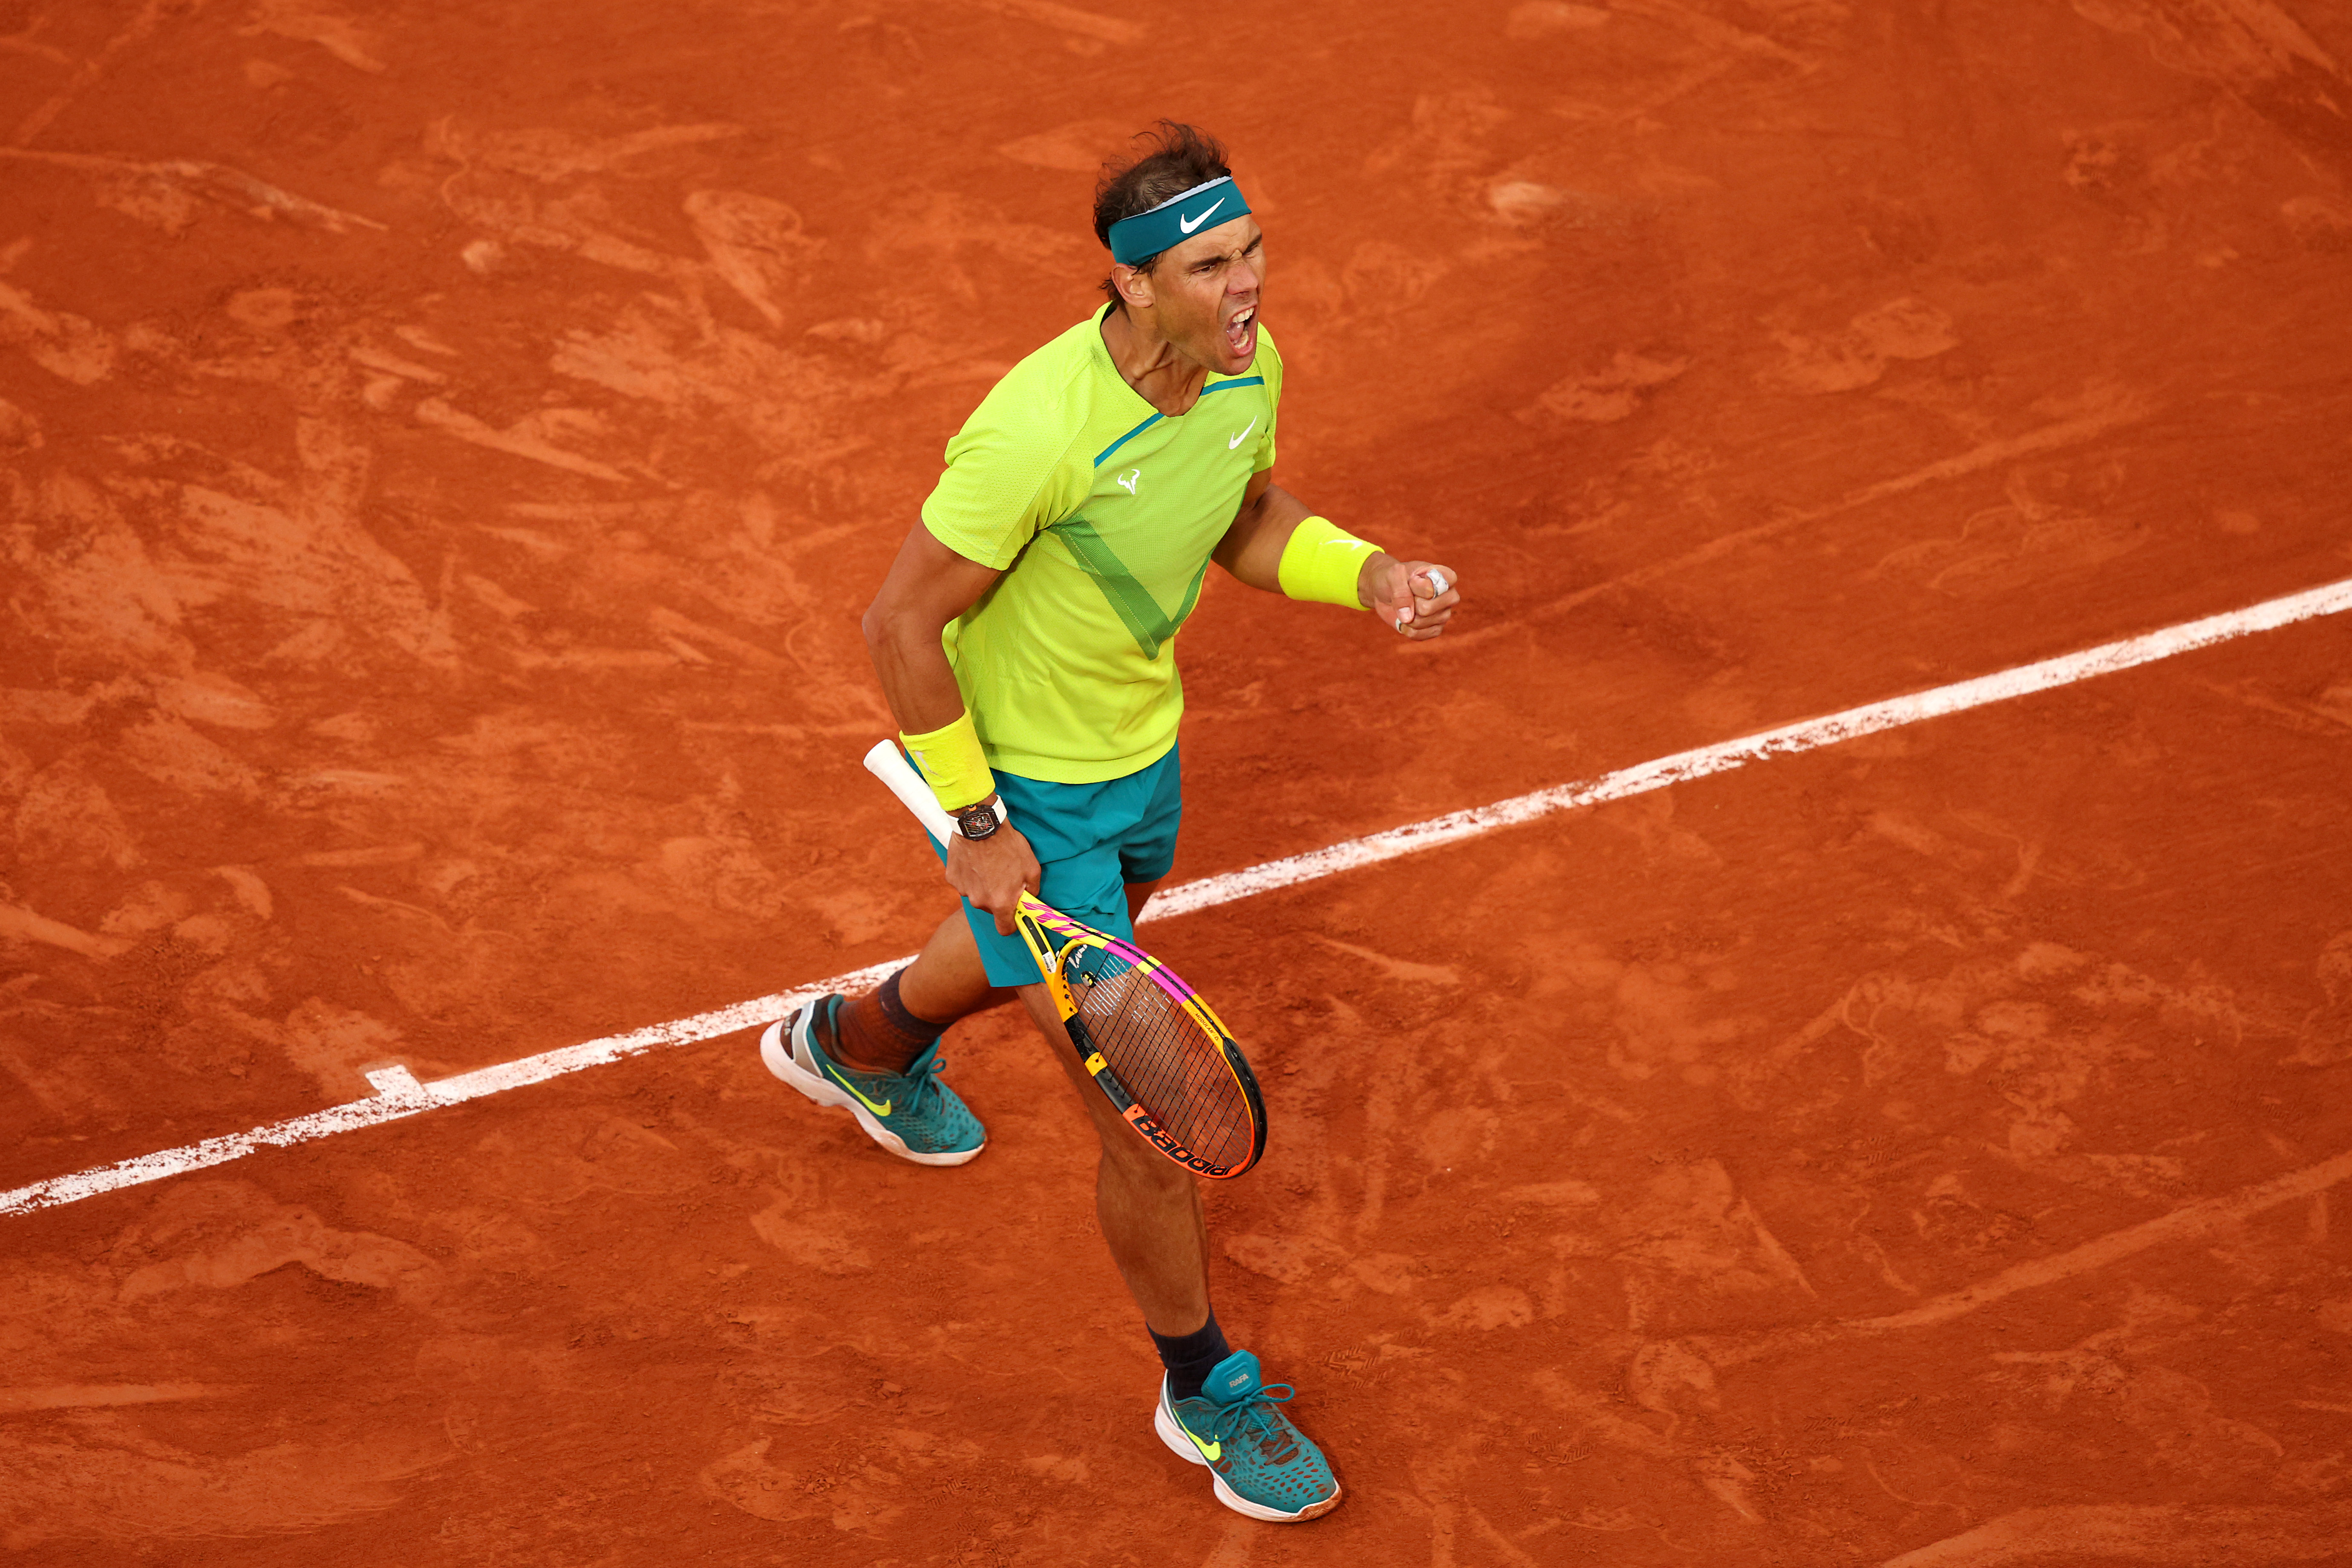 Rafael Nadal wins five-setter against Felix Auger-Aliassime in fourth round of French Open